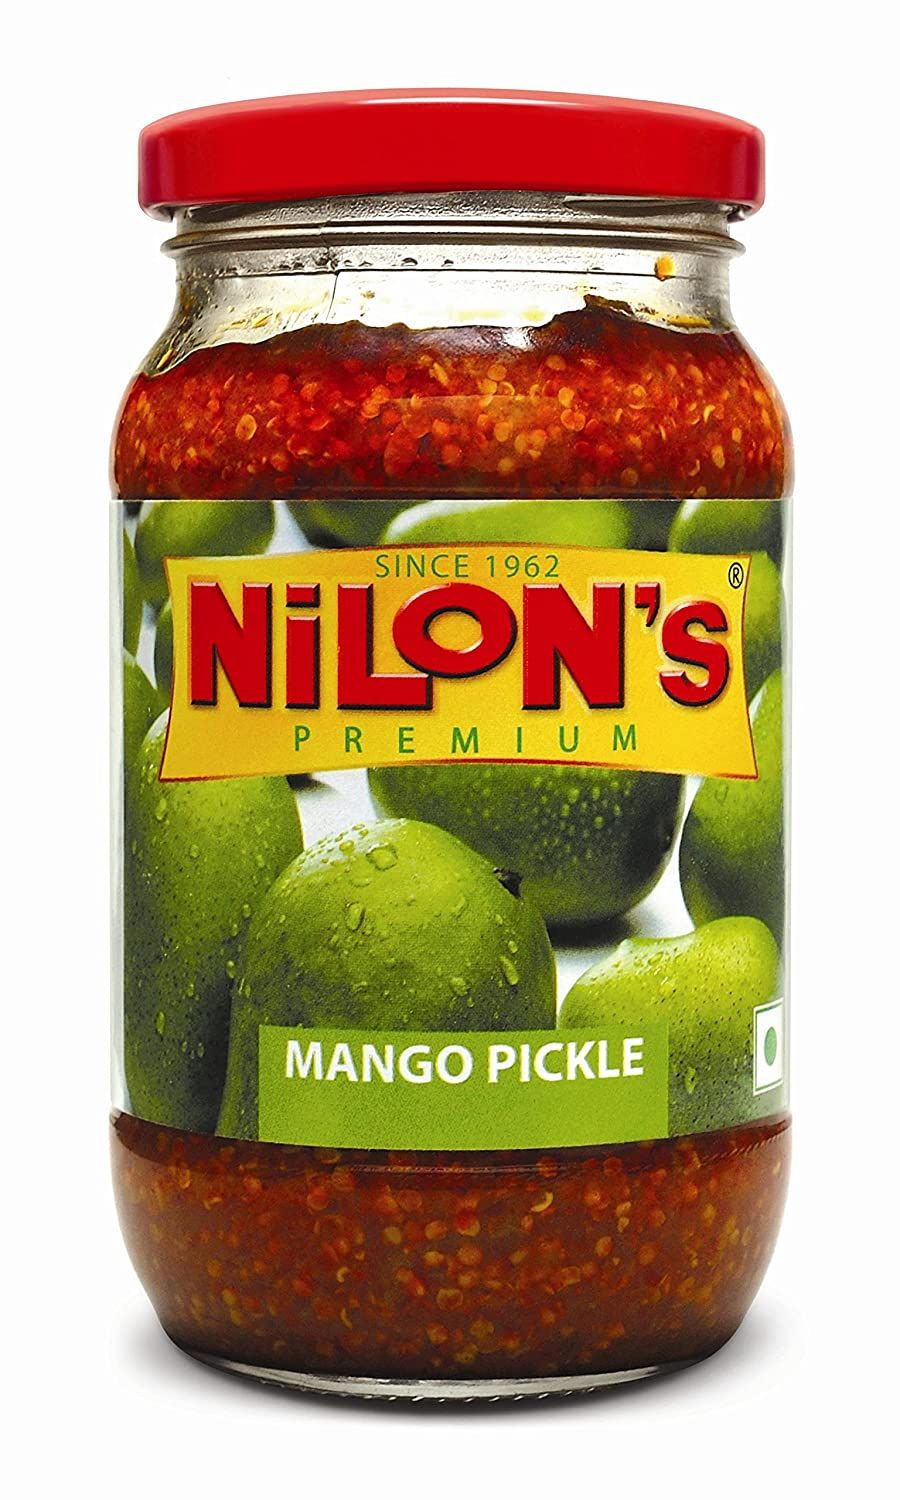 Nilons Mango Pickle in Glass Bottle Image